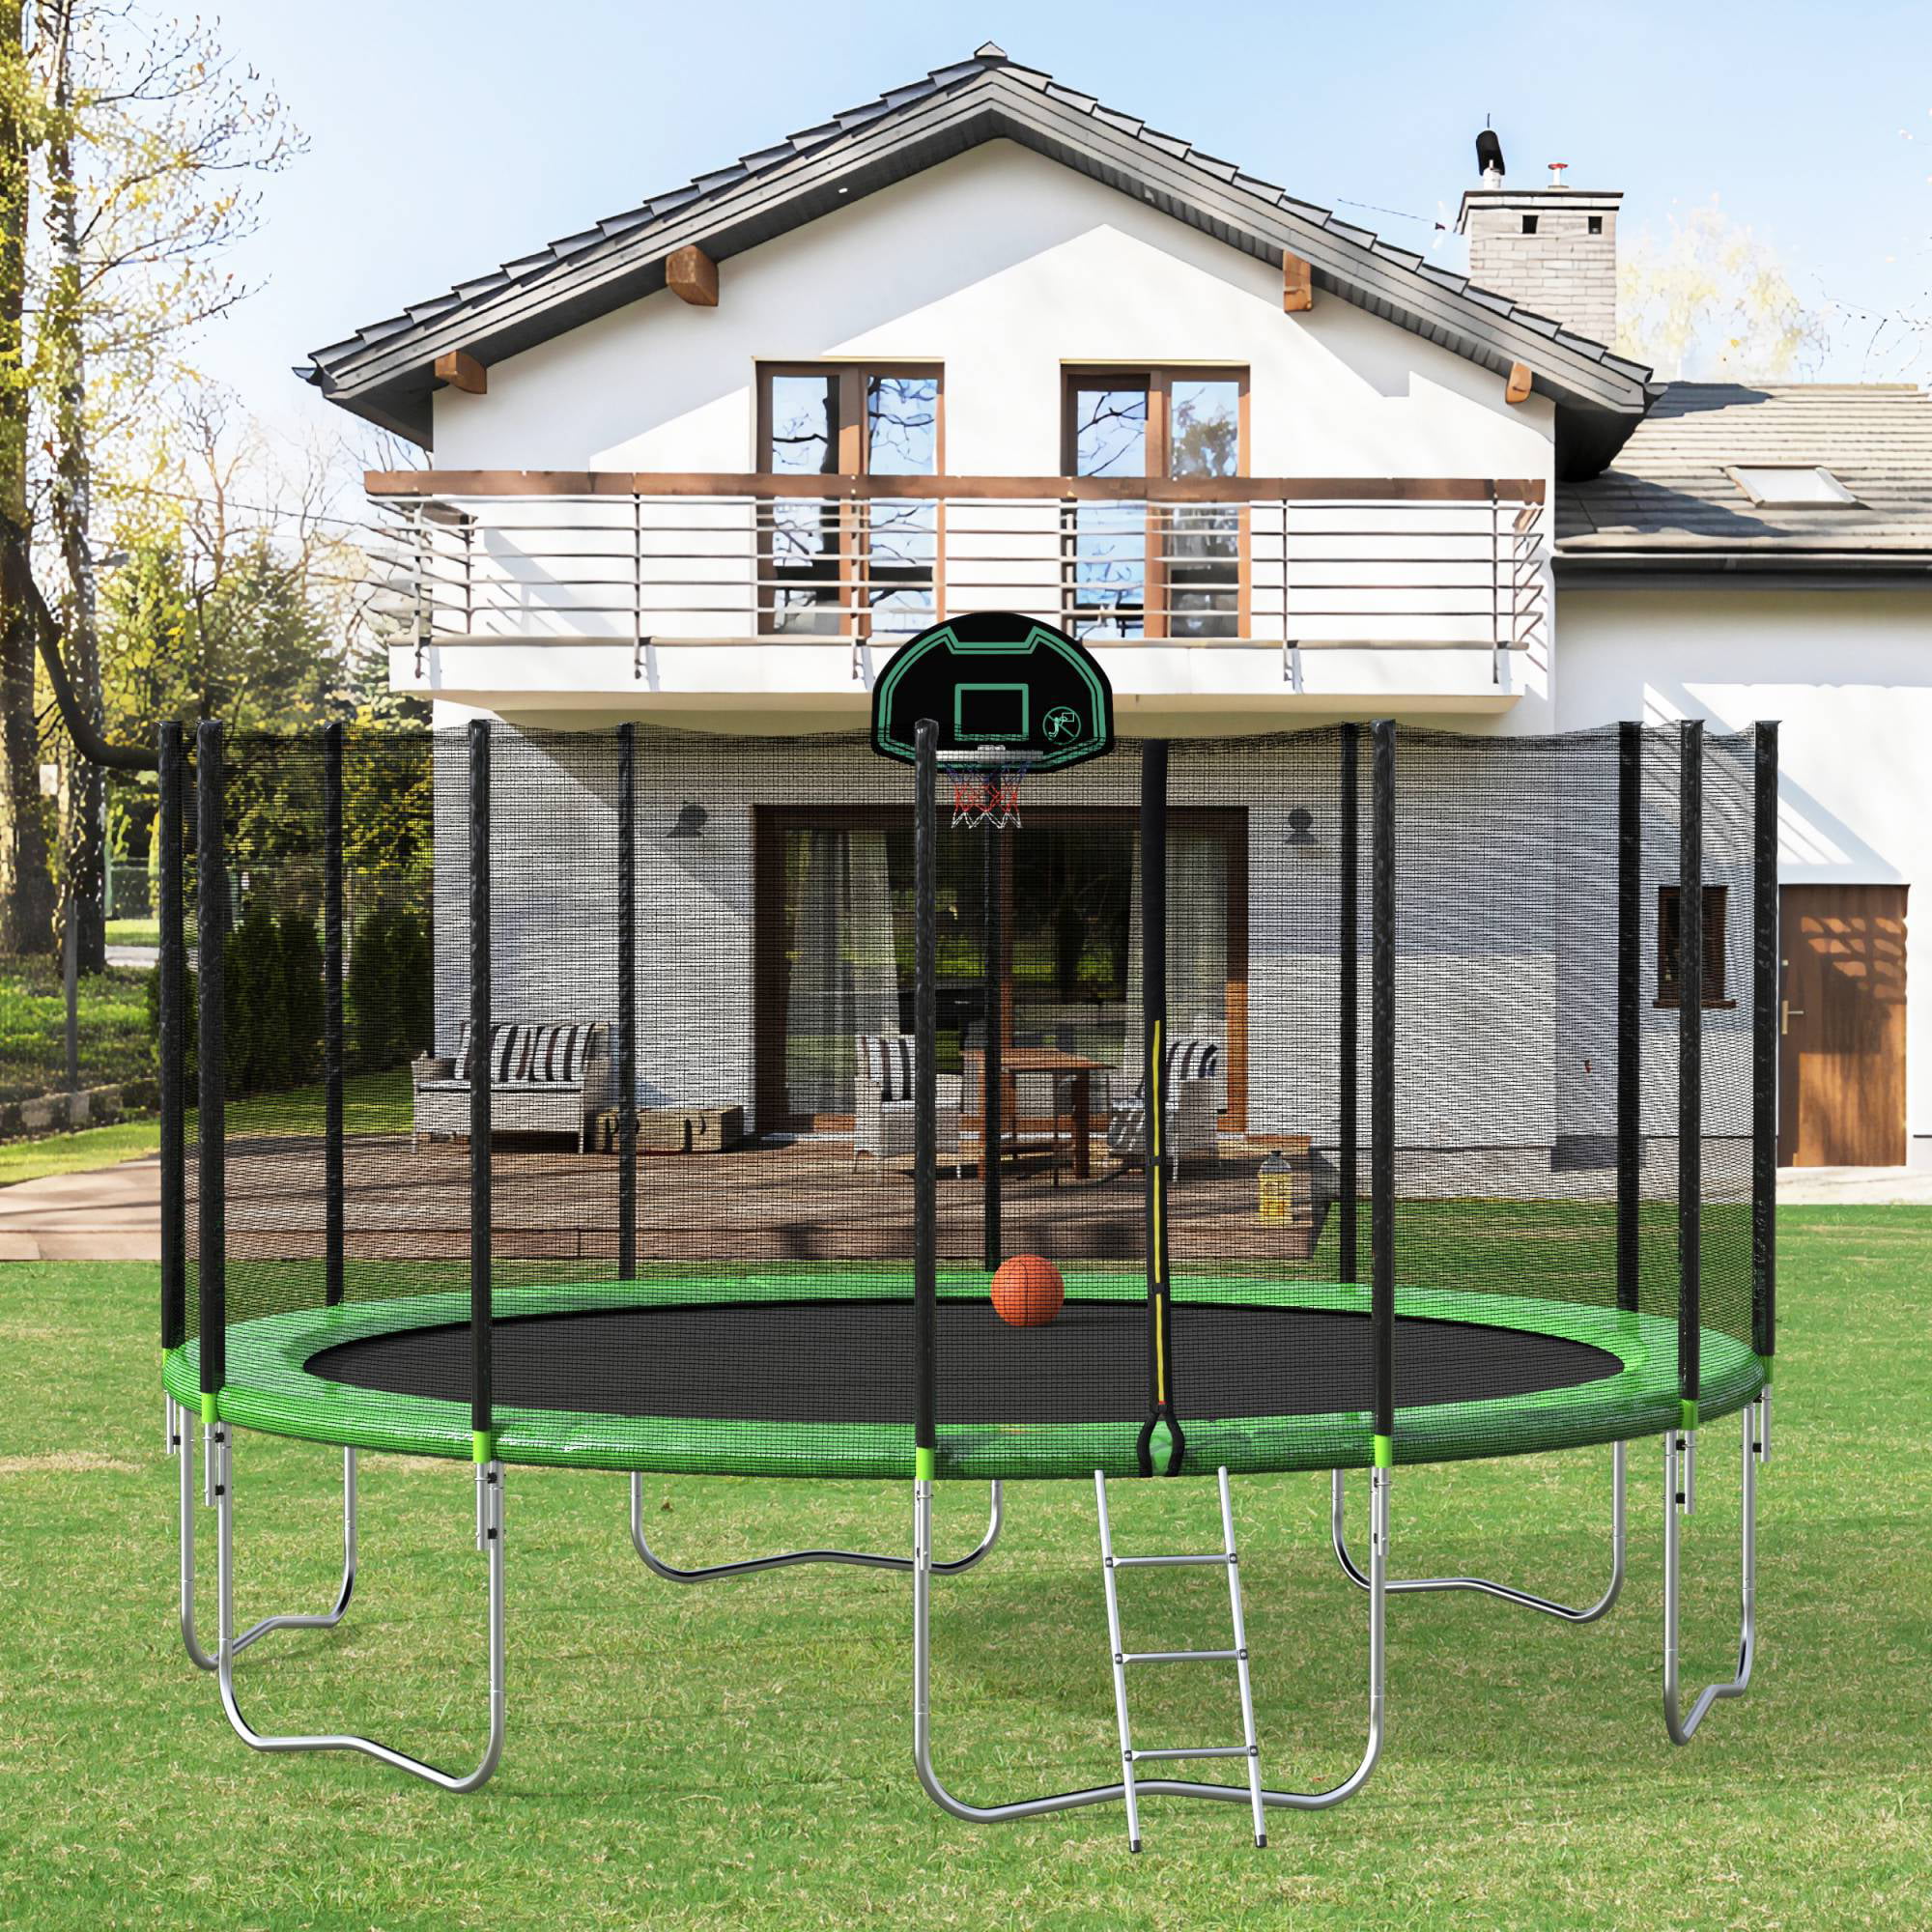 Outdoor Trampoline with Enclosure for Kids with Ladder Recreational Trampolines 10 FT Guaranteed Fun with 4 Extra Corkscrews for Safety and Galvanized Anti-Rust Coating 